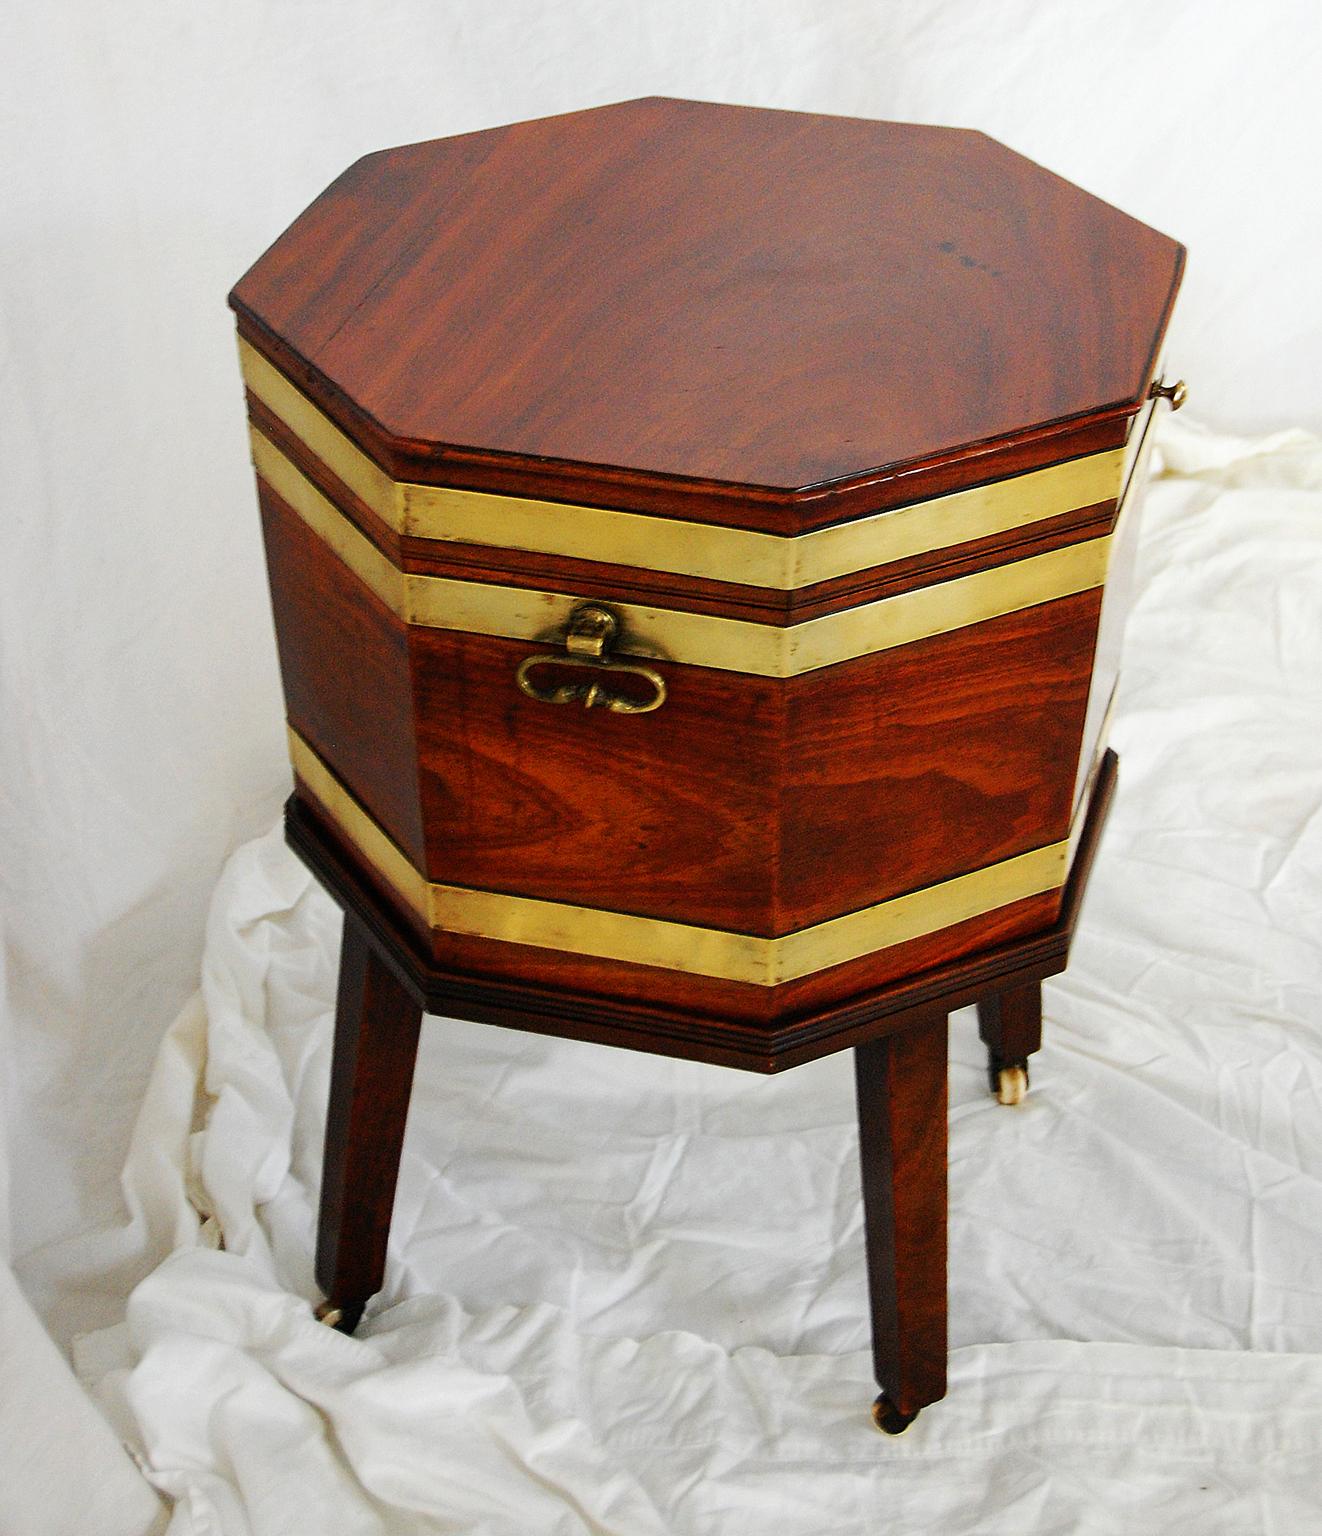 English Georgian period Chippendale mahogany octagonal cellarette on original base with brass side handles and brass strapping. This cellarette retains its original interior with divisions for bottles and original lining. There is a professional